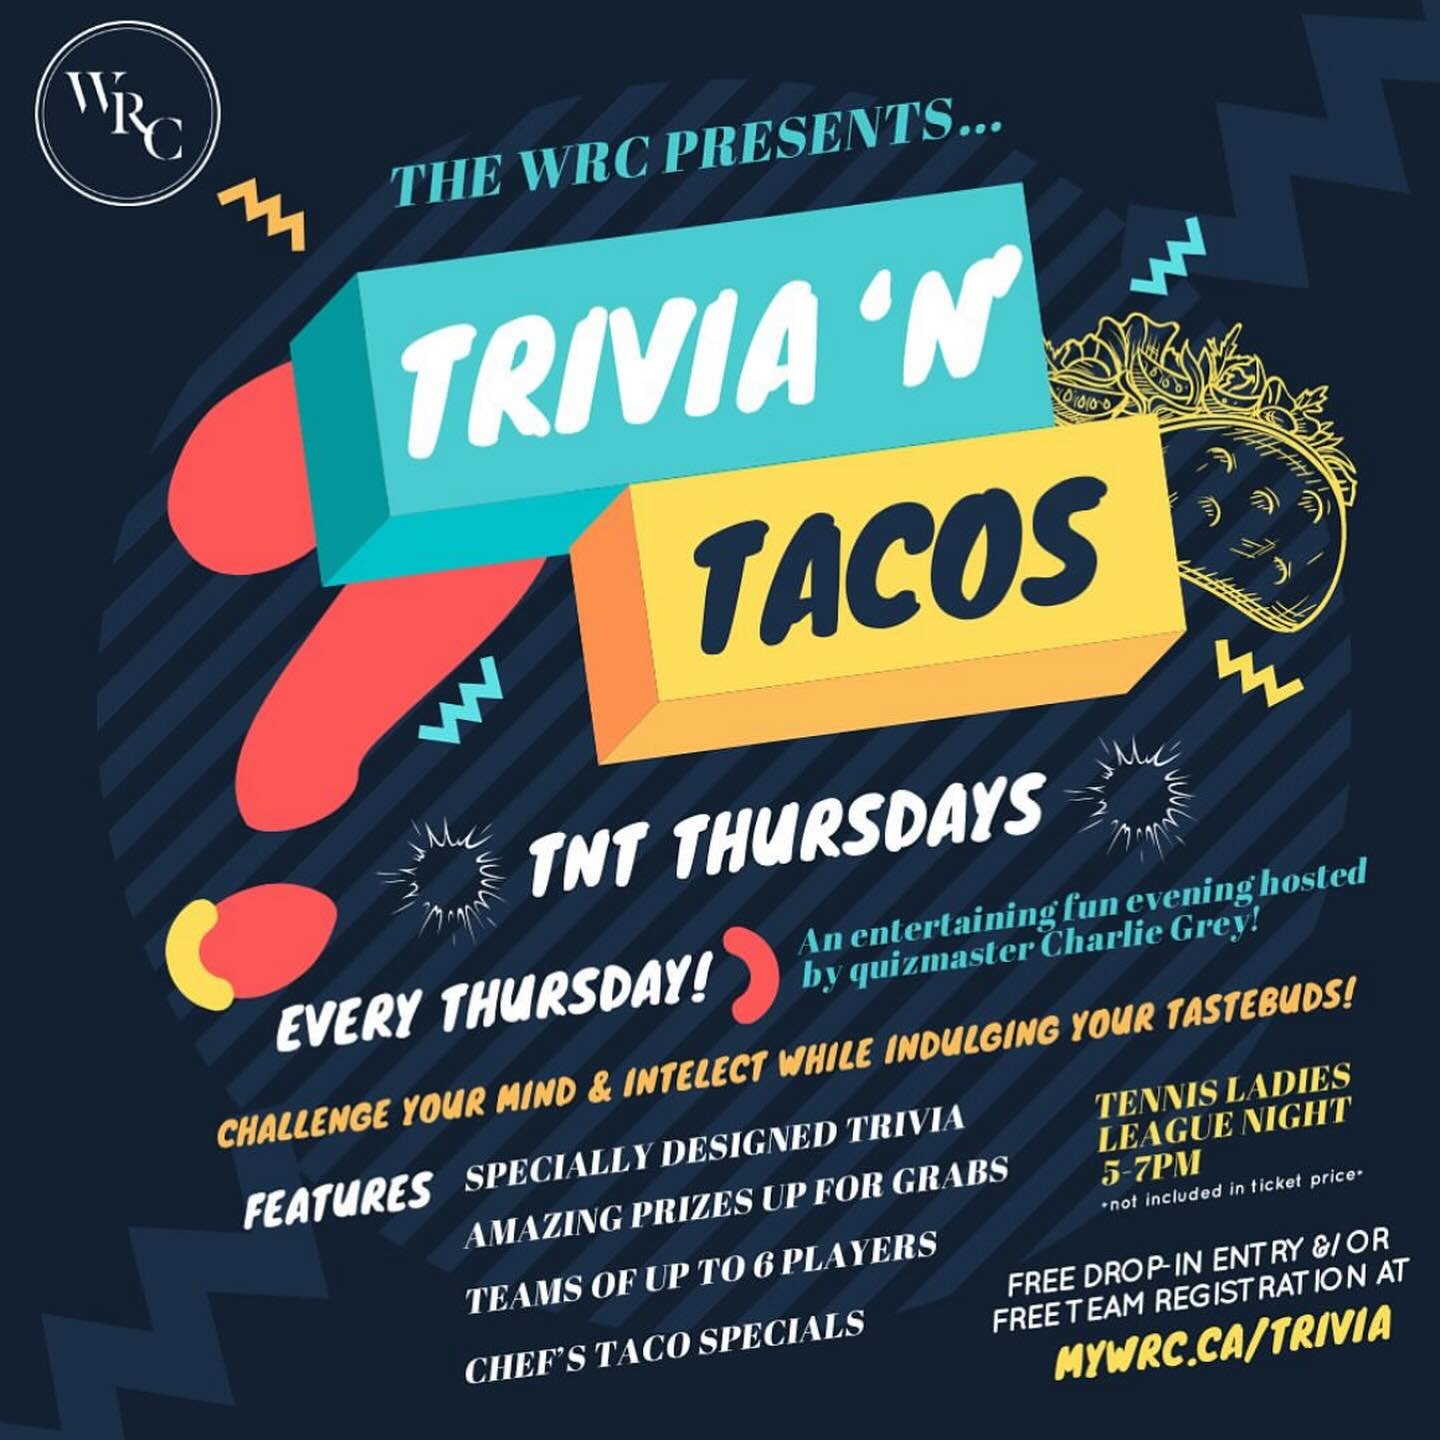 Thursday night court-goers, you&rsquo;re in luck!🎉

Join us in the @wrccafebar lounge after your game every Thursday for TRIVIA &lsquo; N TACOS NIGHT hosted by our awesome quiz master Charlie! Test your knowledge while relishing Chef Thao&rsquo;s va